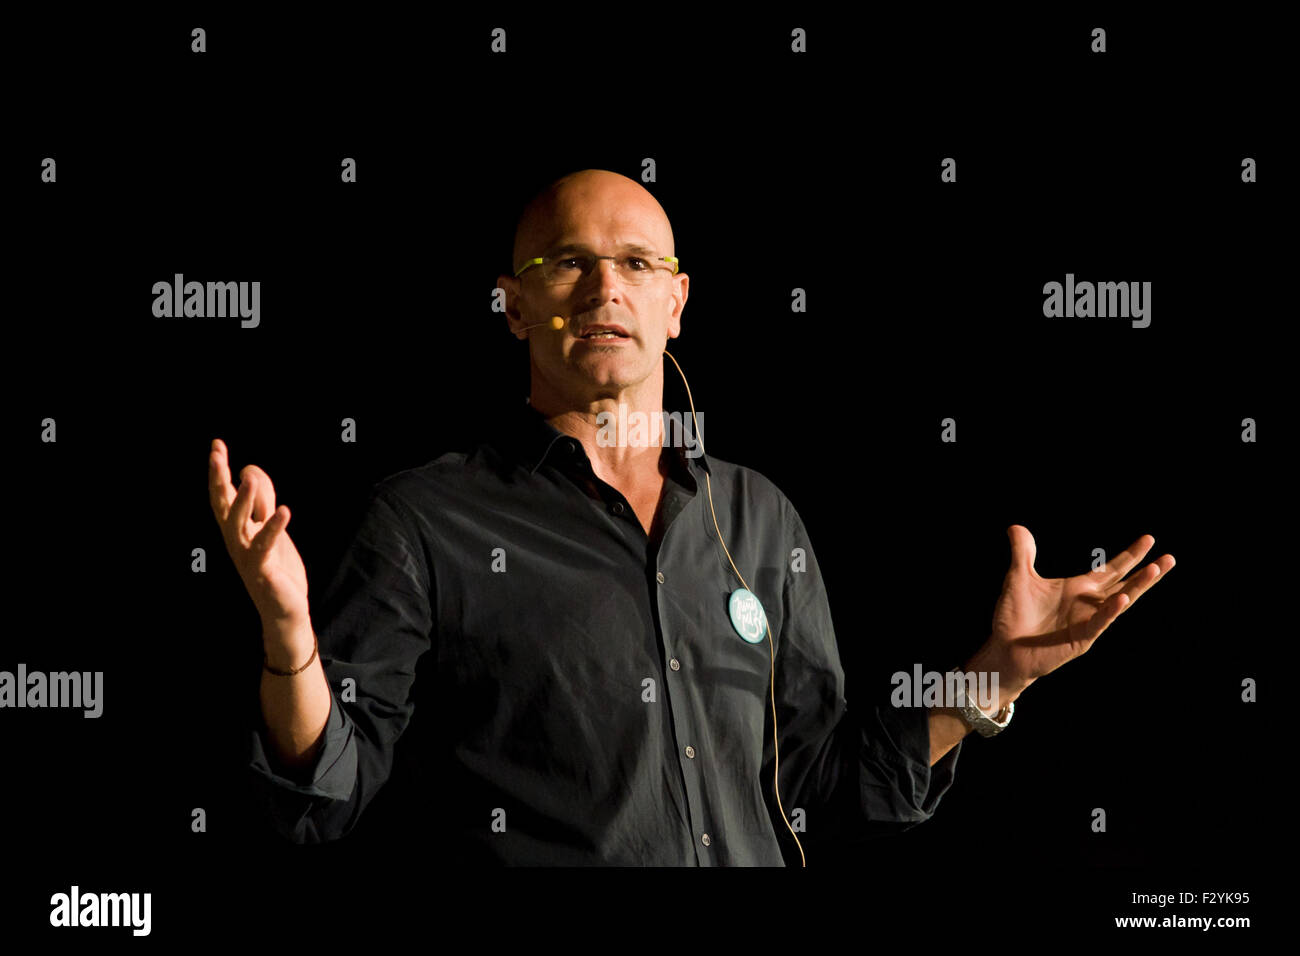 RAUL ROMEVA addresses to the audience during the final campaign rally of 'Junts pel Si' (Together for Yes) in Barcelona on 25 Se Stock Photo